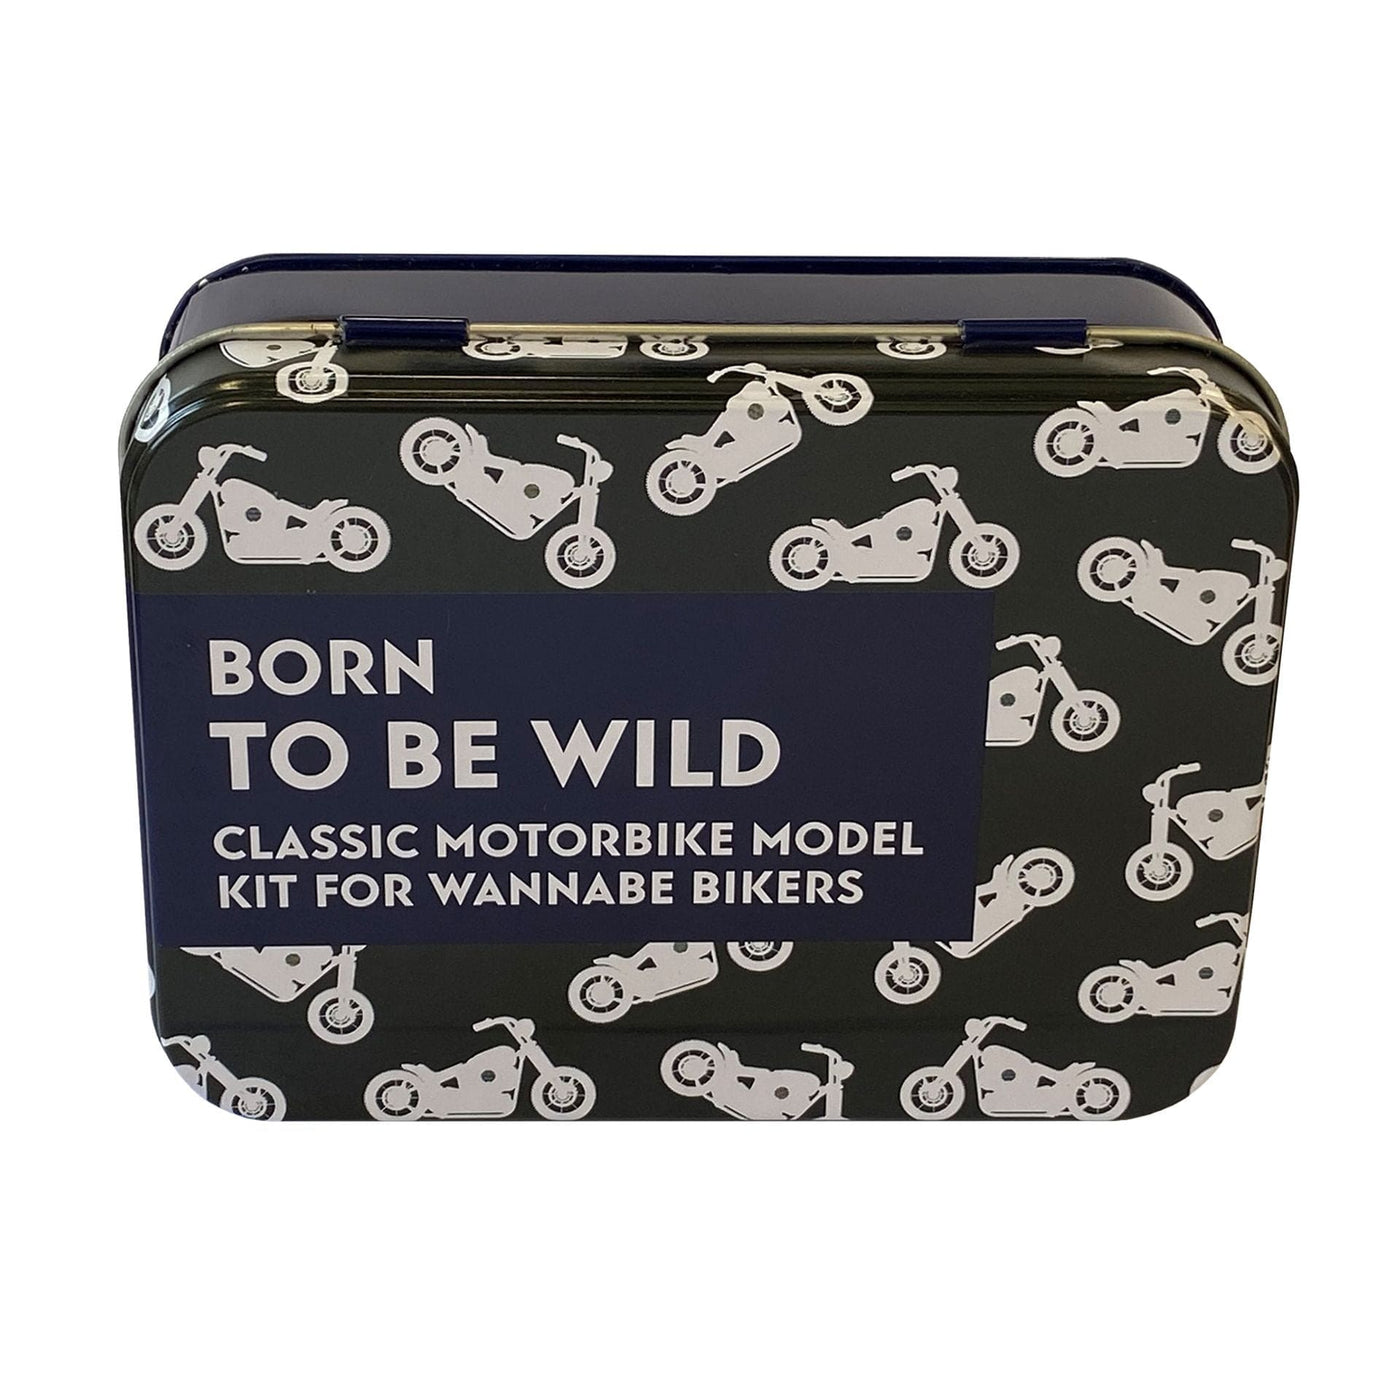 Widdop Gifts Novelty Gifts Build a Classic Motorbike Gift in a Tin